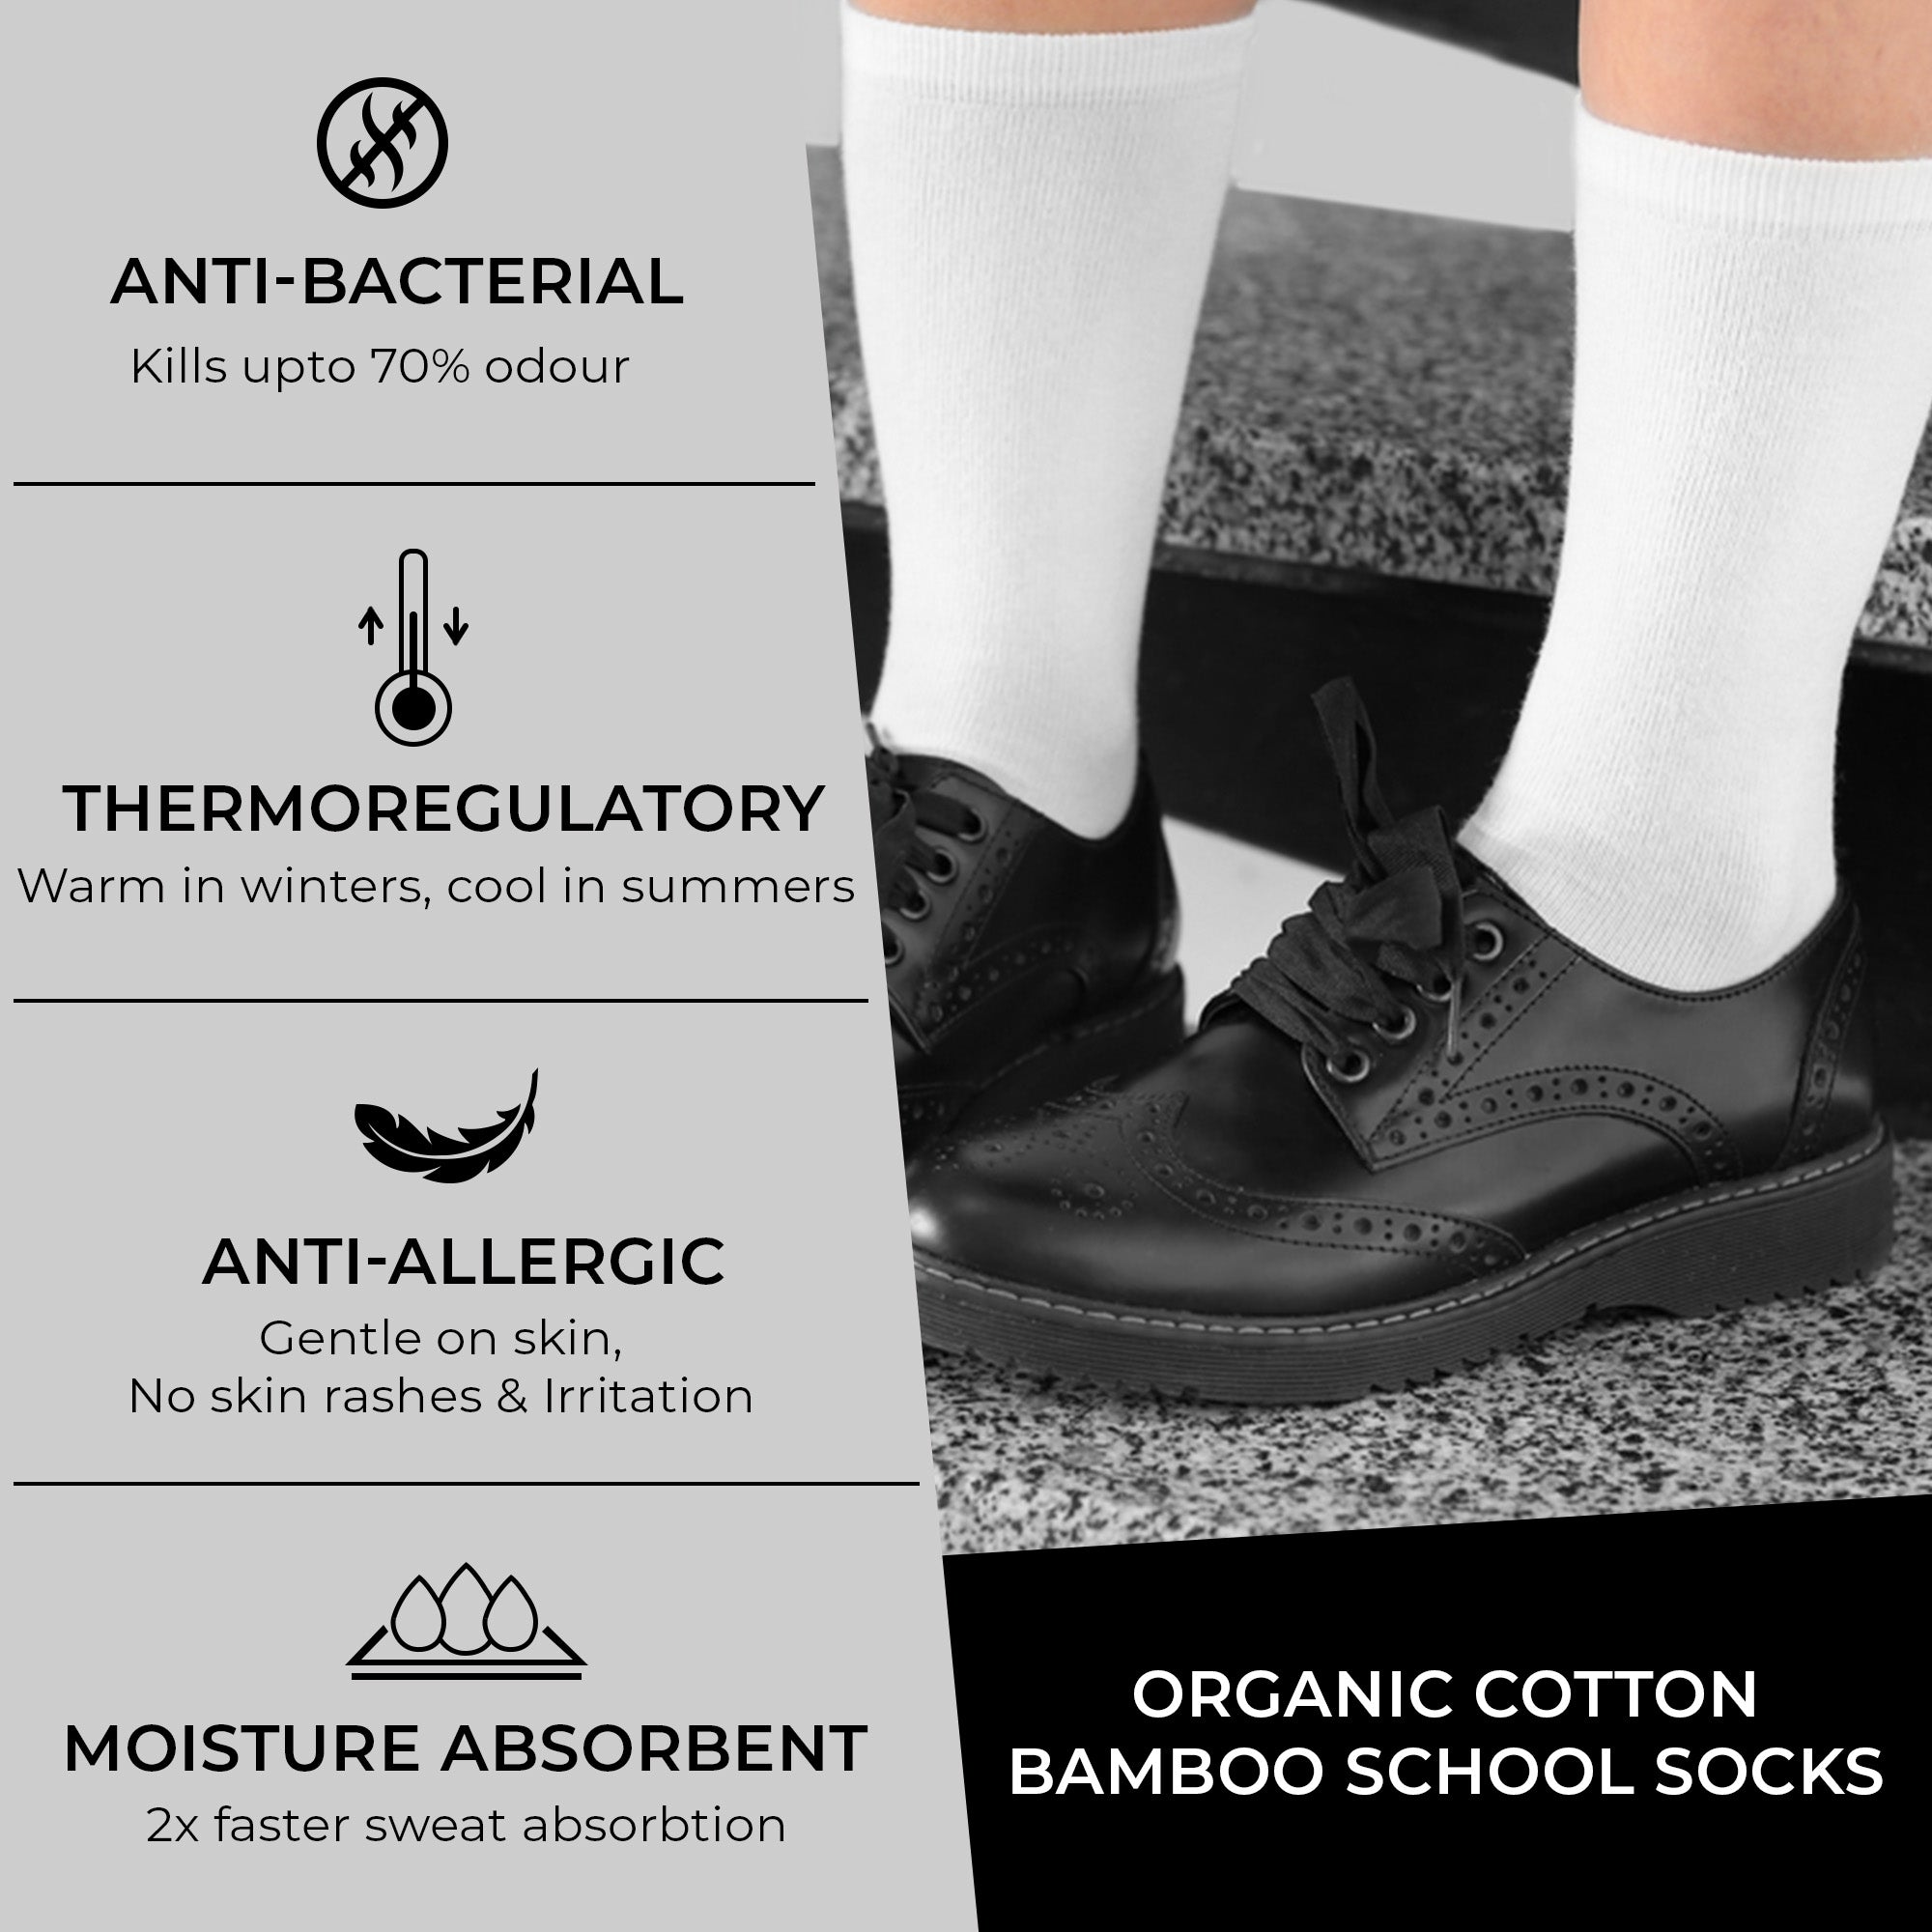 Kids Organic Cotton School Socks - Unisex - Calf length- Pack of 5 (White)- Extra soft and Breathable